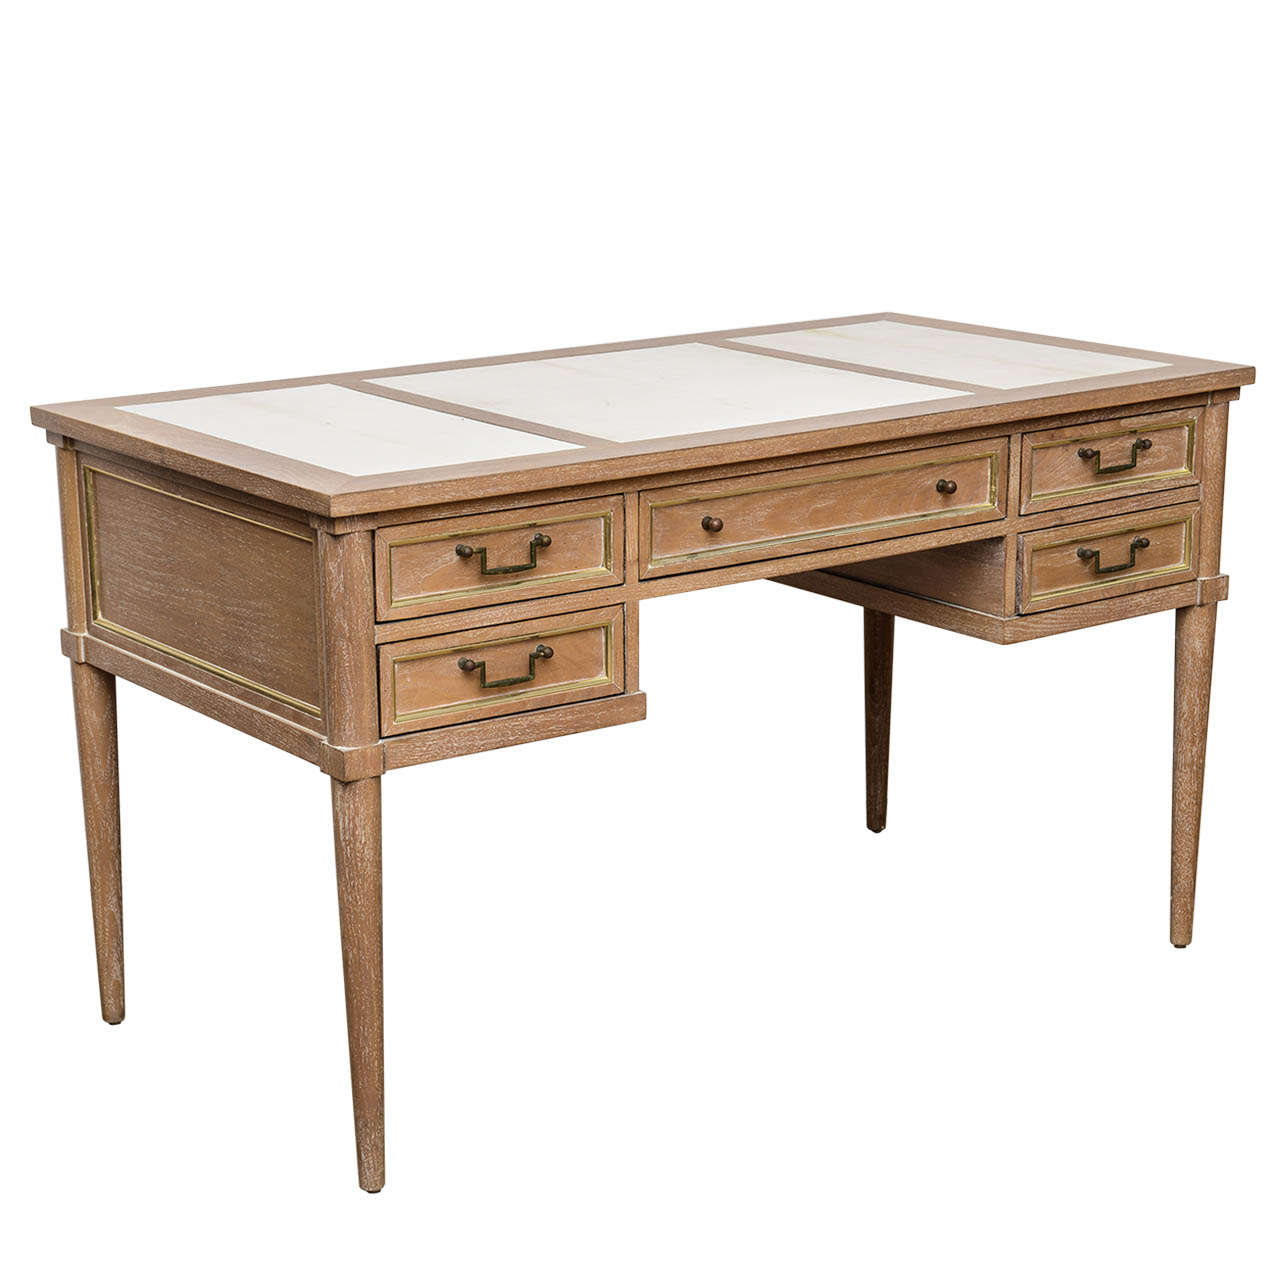 NeoClassical style Cerused and Parchment Desk.